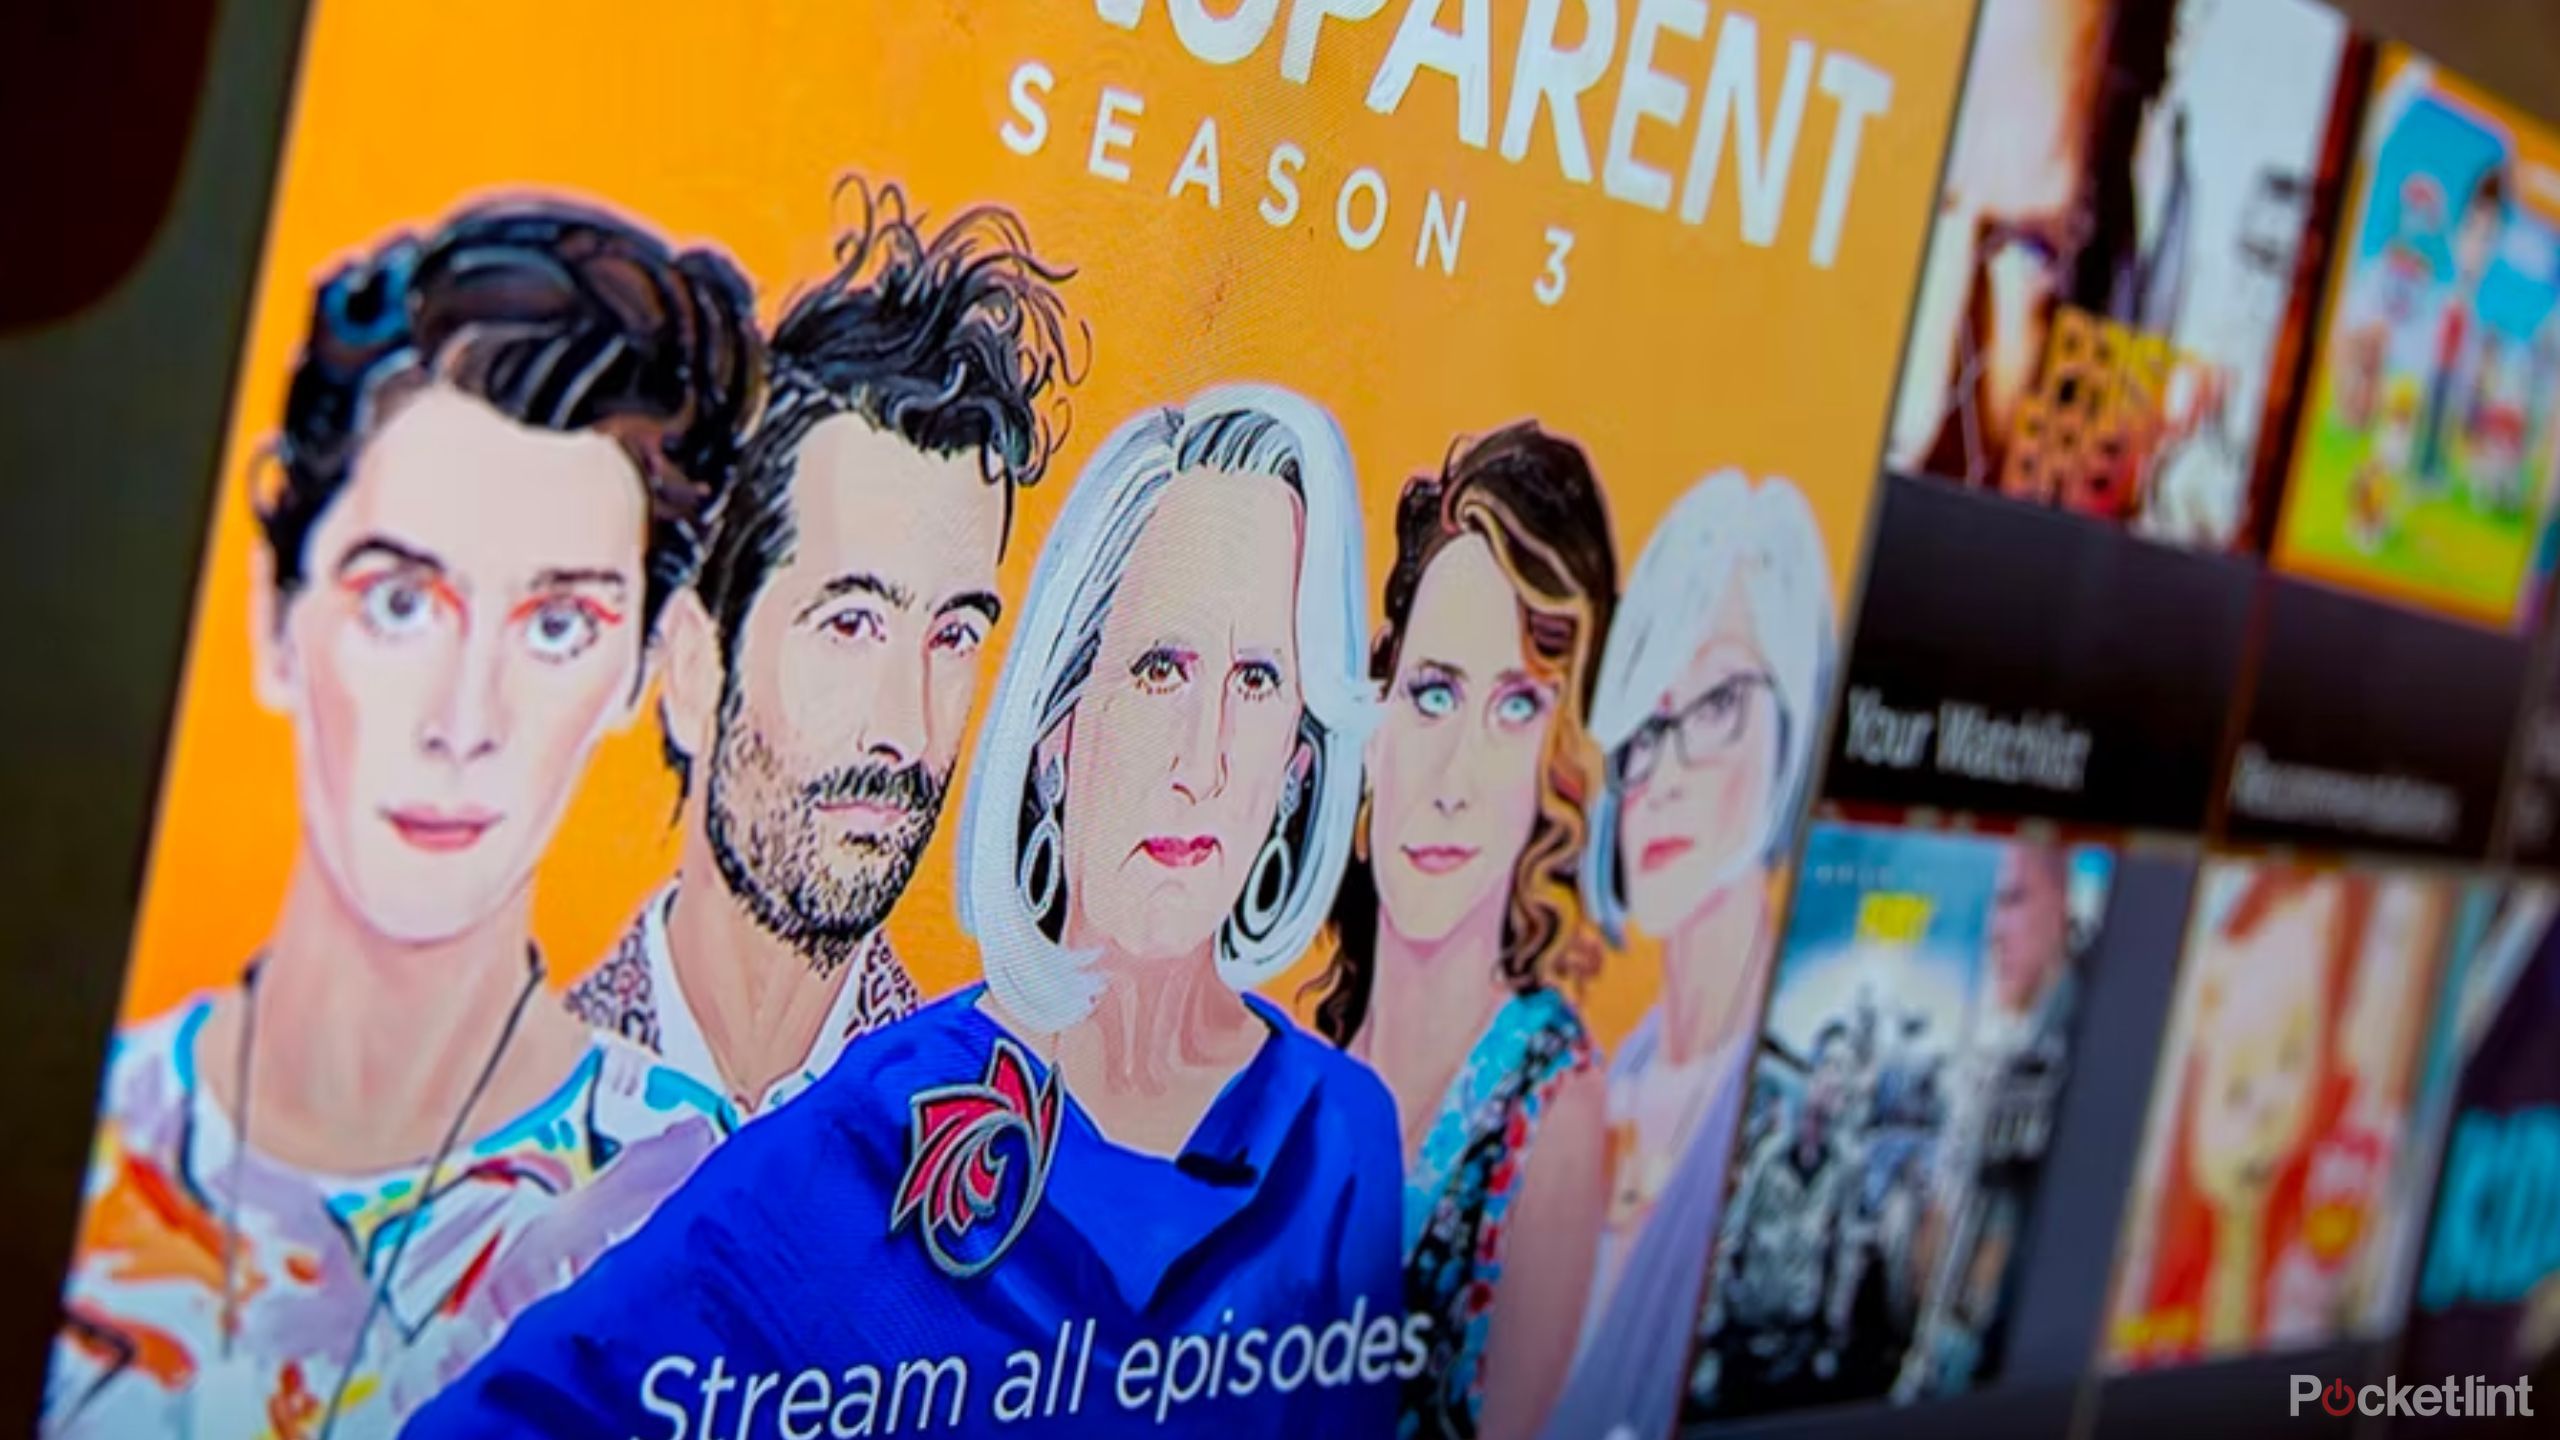 Prime Video add-on channels discounted to $2 for two months